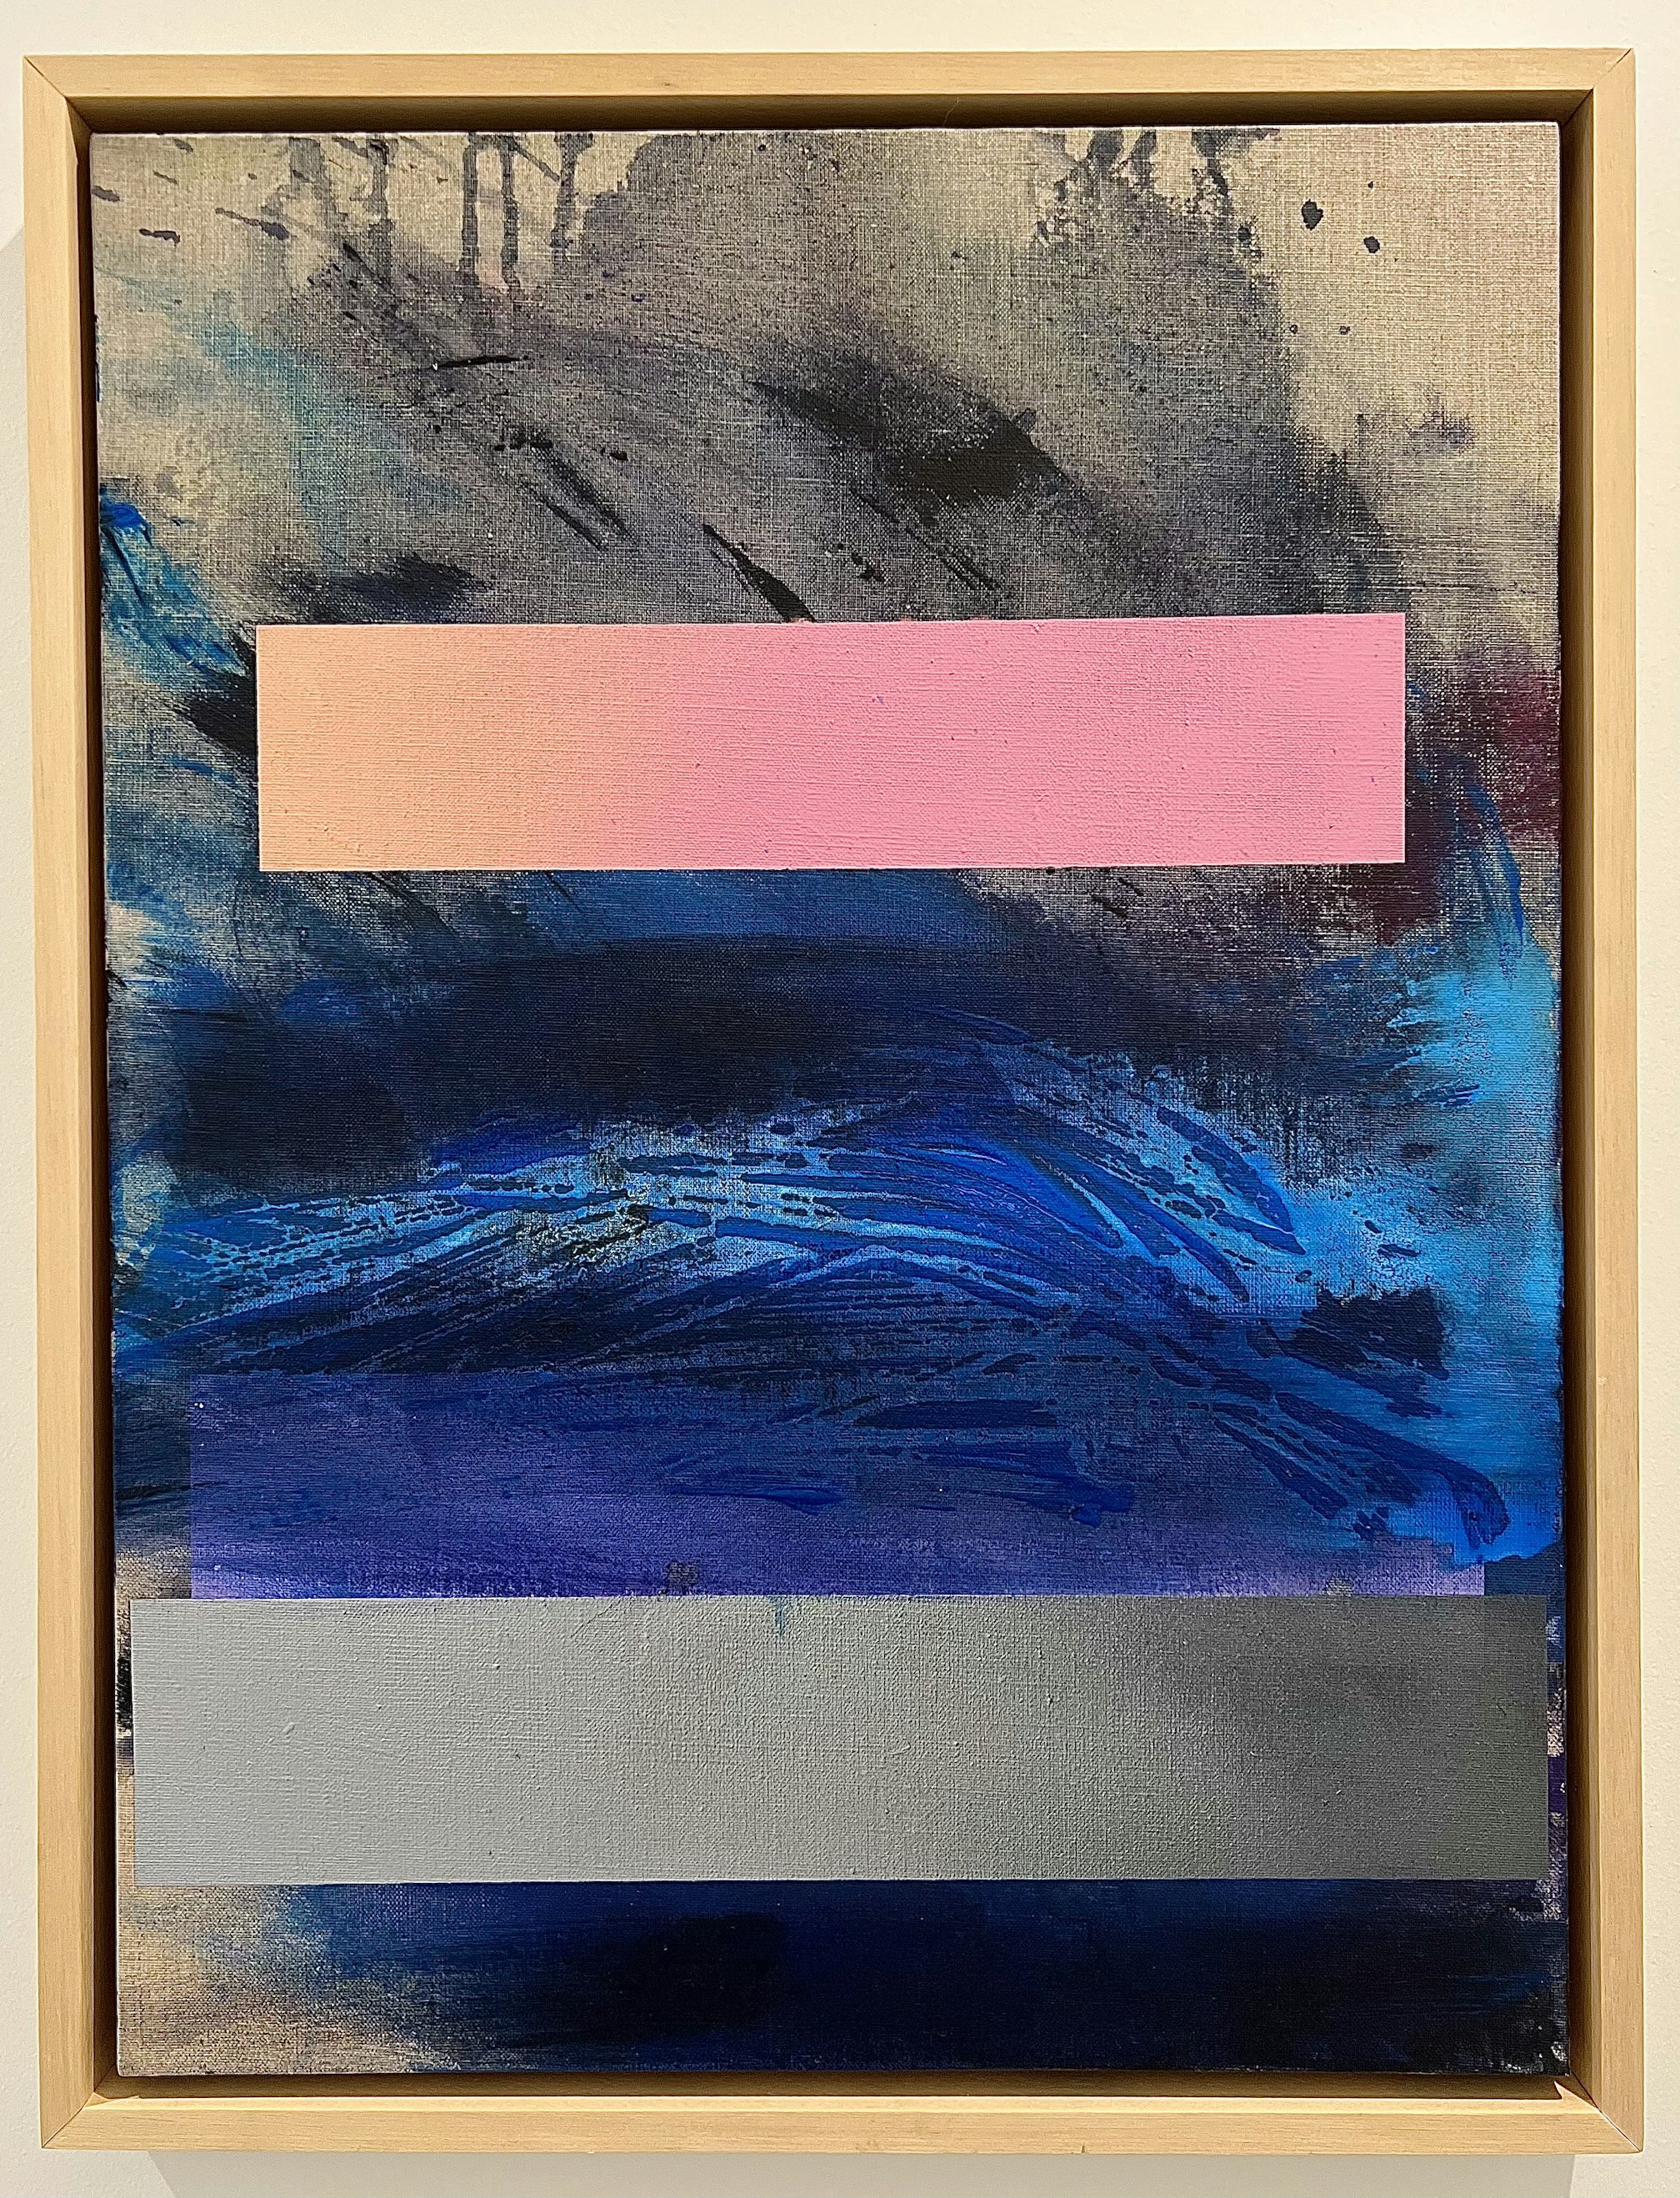 pink and grey rectangles over blue abstract